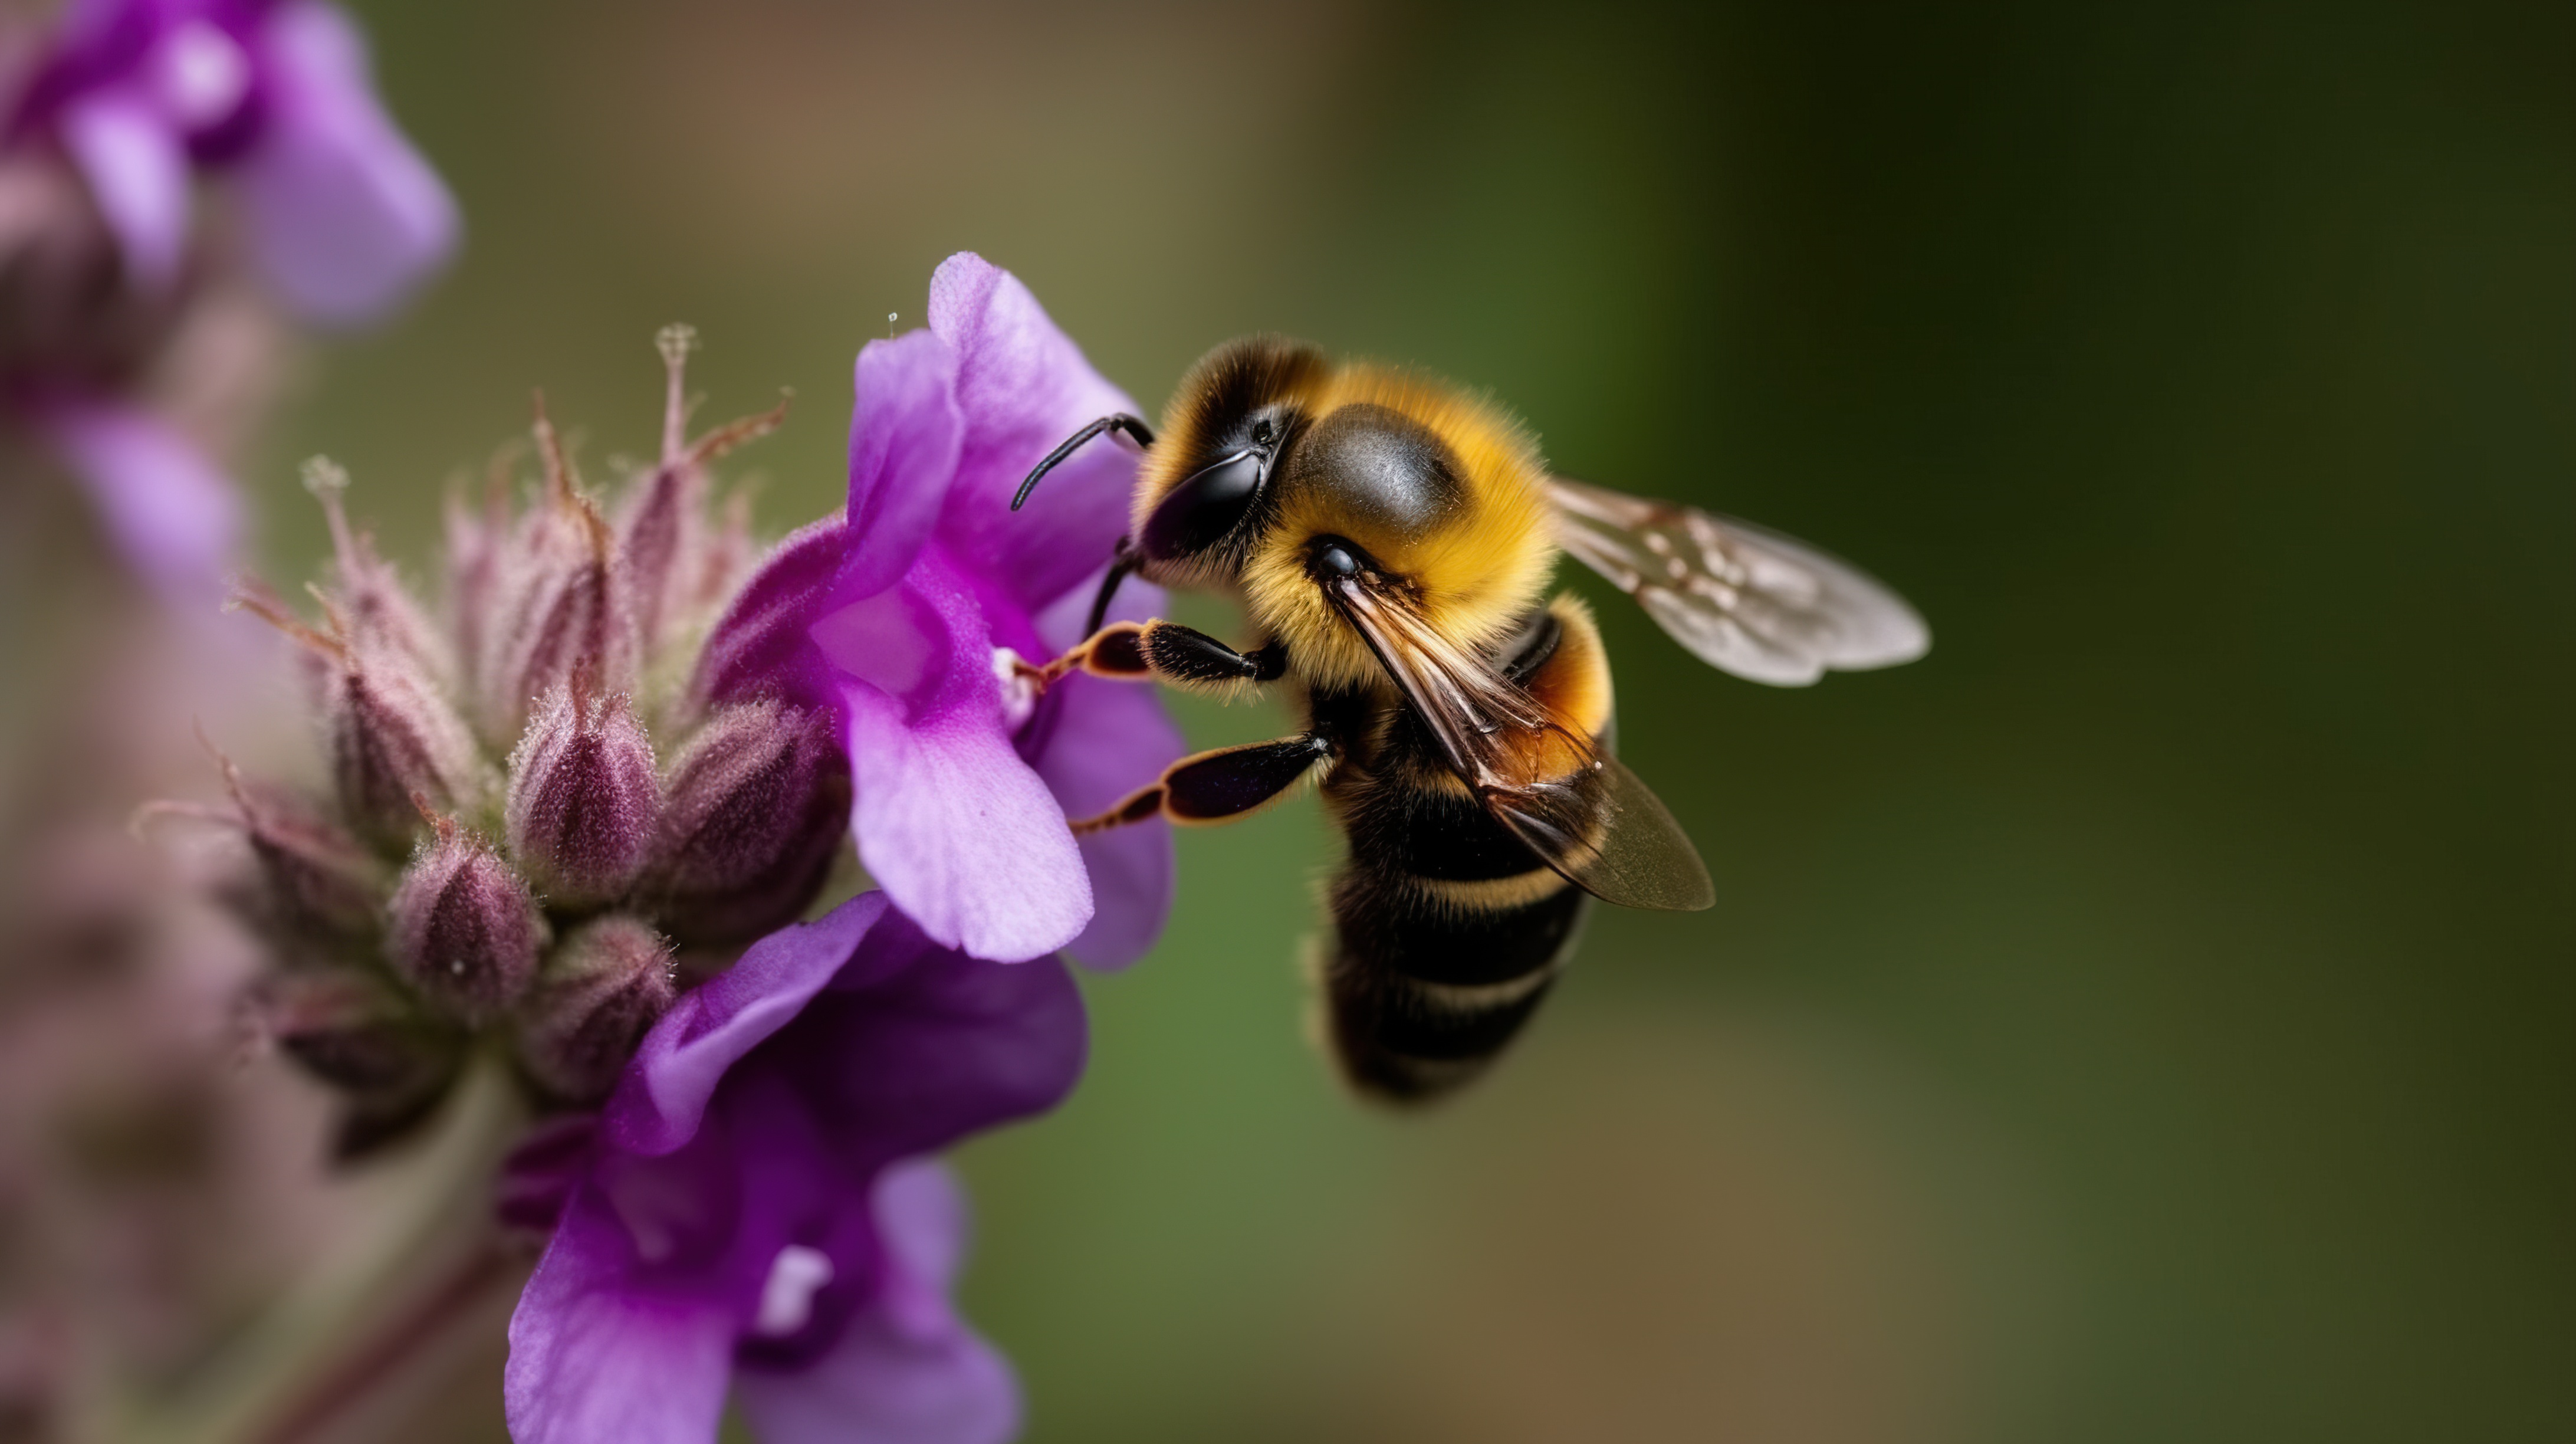 Close-up shot head of a honey bee sitting on the violet or purple flower